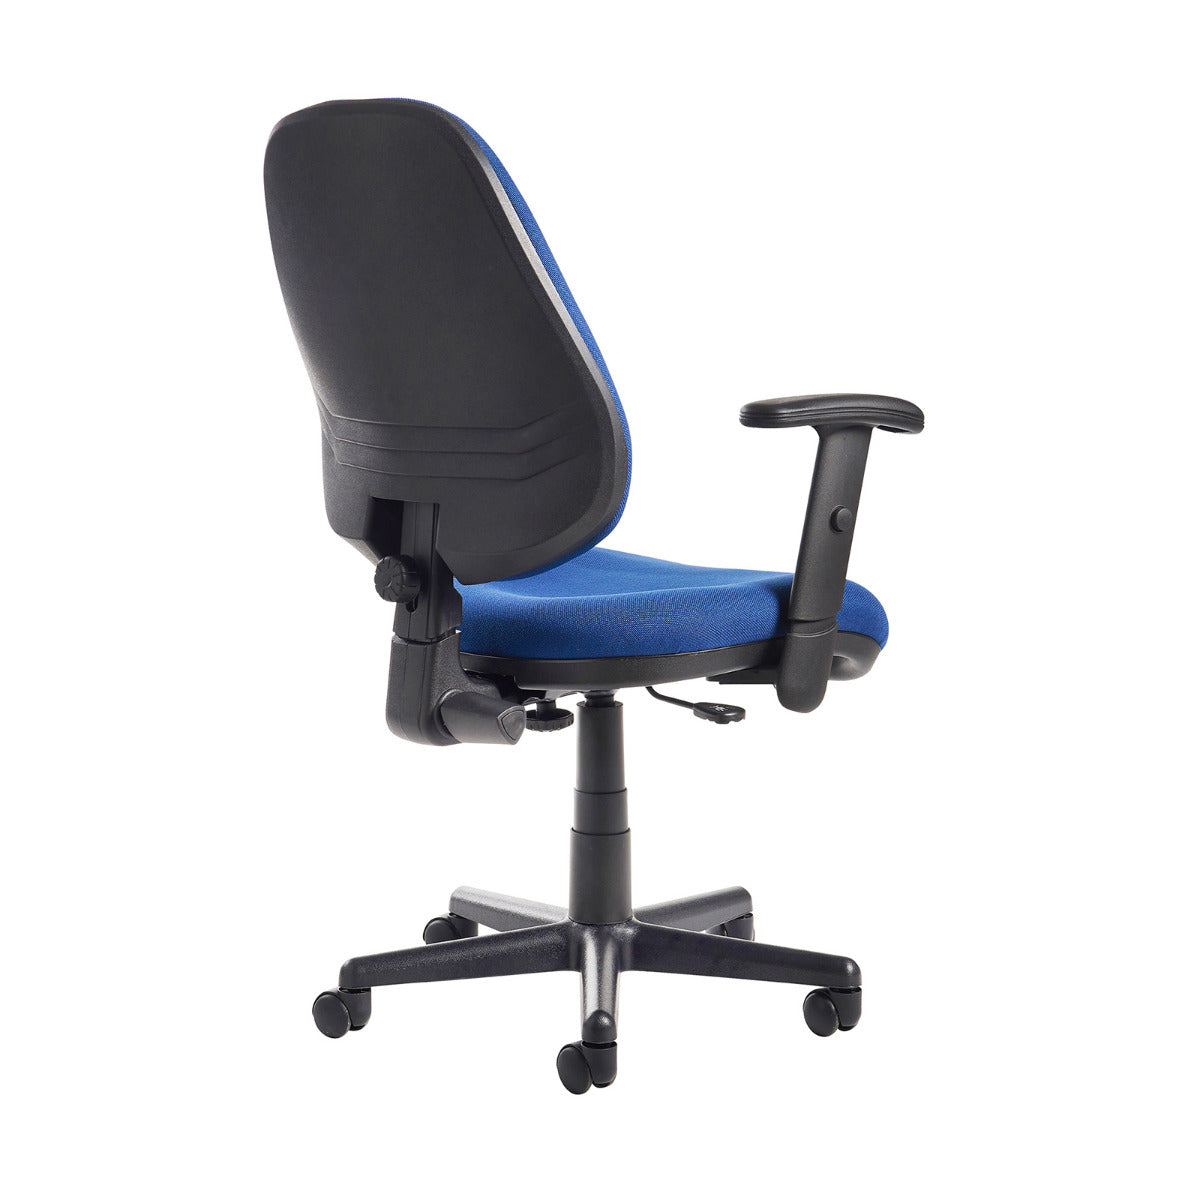 Bilbao Budget Operator Chair - Charcoal or Blue Option - No Arms, Fixed Arms or Height Adjustable Arm Option